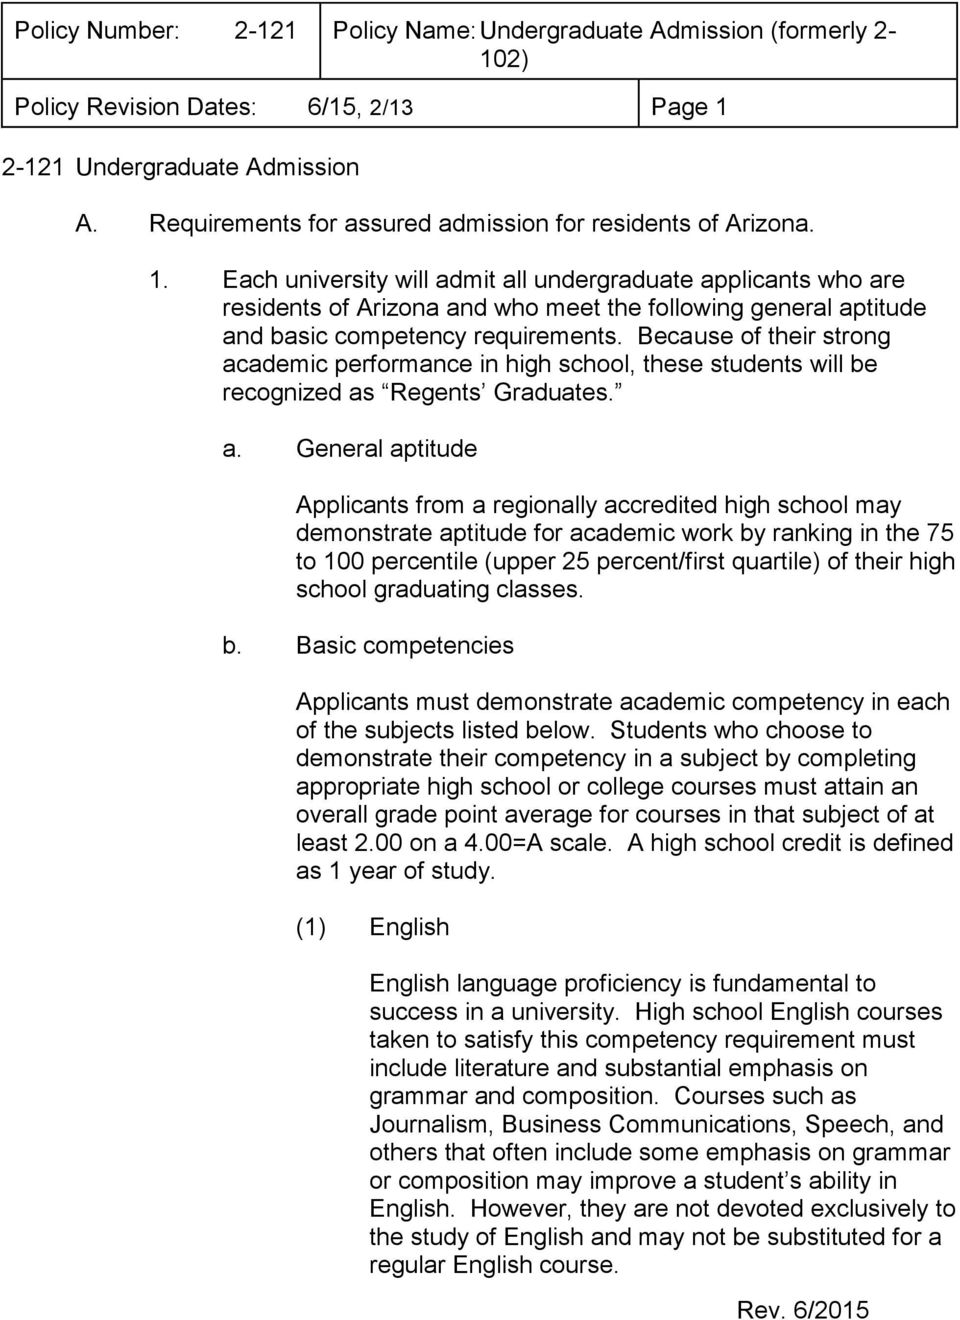 Each university will admit all undergraduate applicants who are residents of Arizona and who meet the following general aptitude and basic competency requirements.